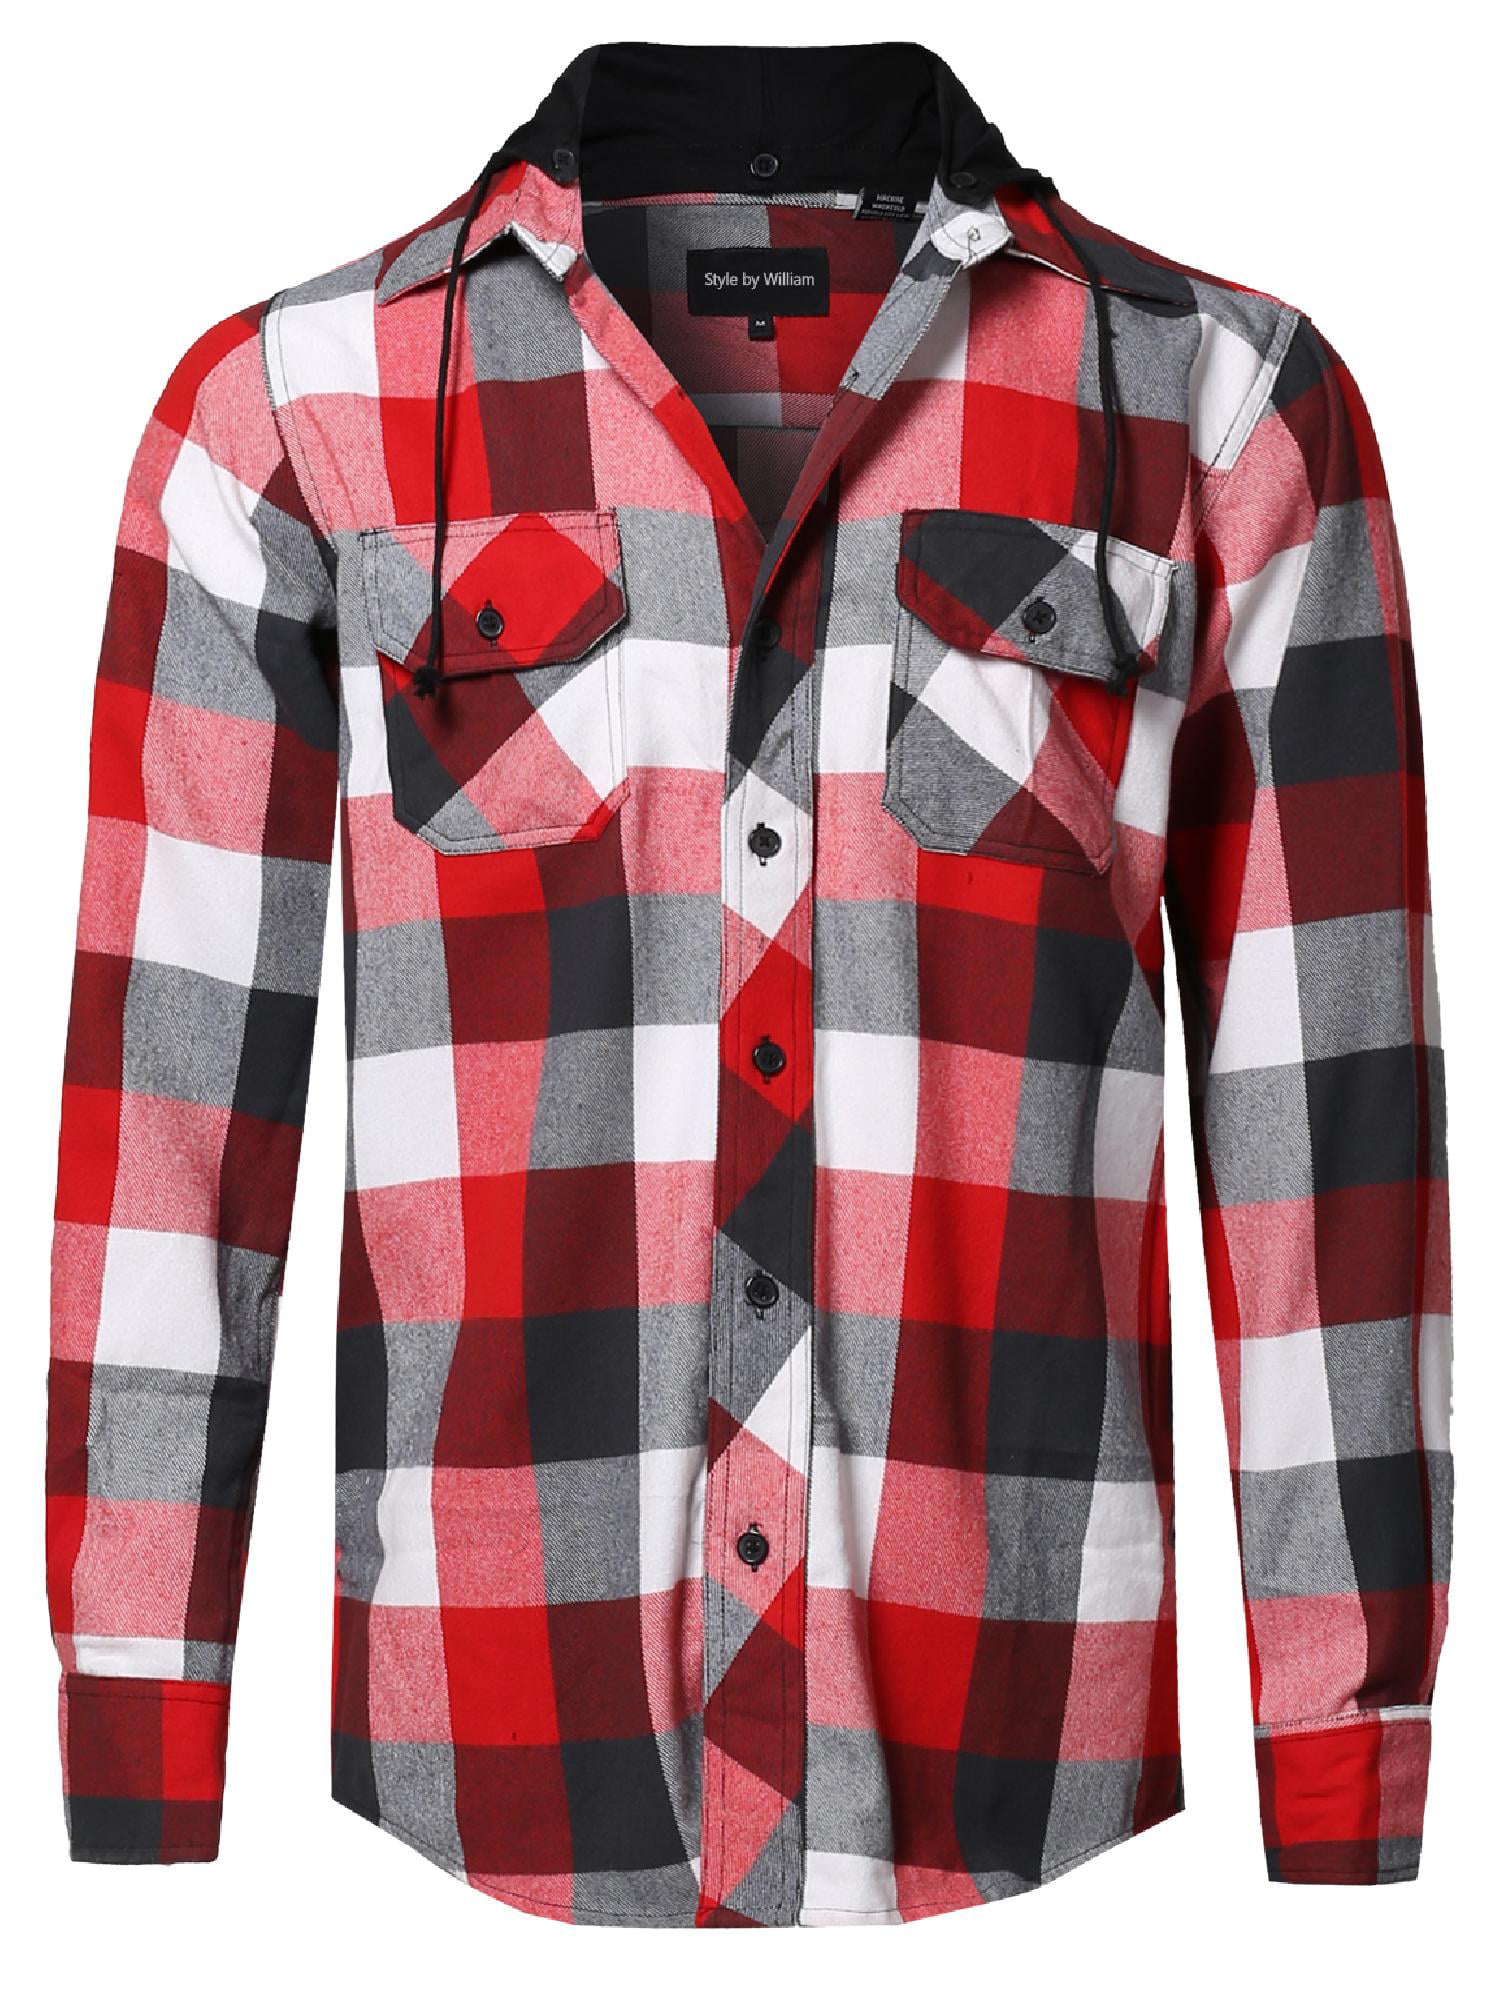 Style by William Mens Casual Plaid Flannel Woven Long Sleeves Button Down Shirt